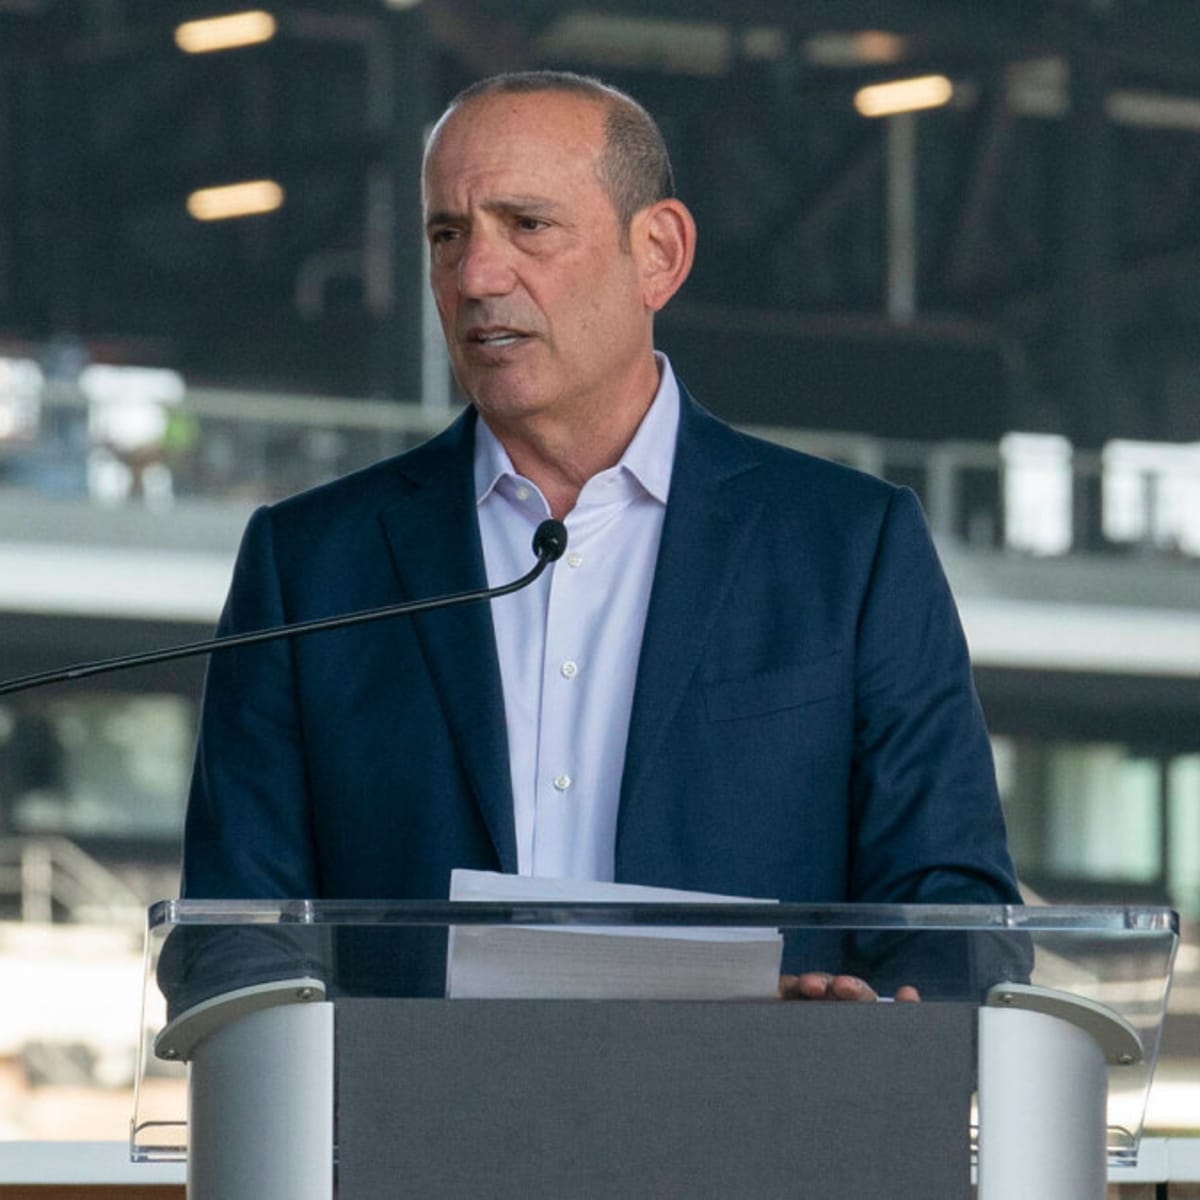 MLS clubs gain favorable draws for opening round of reformatted